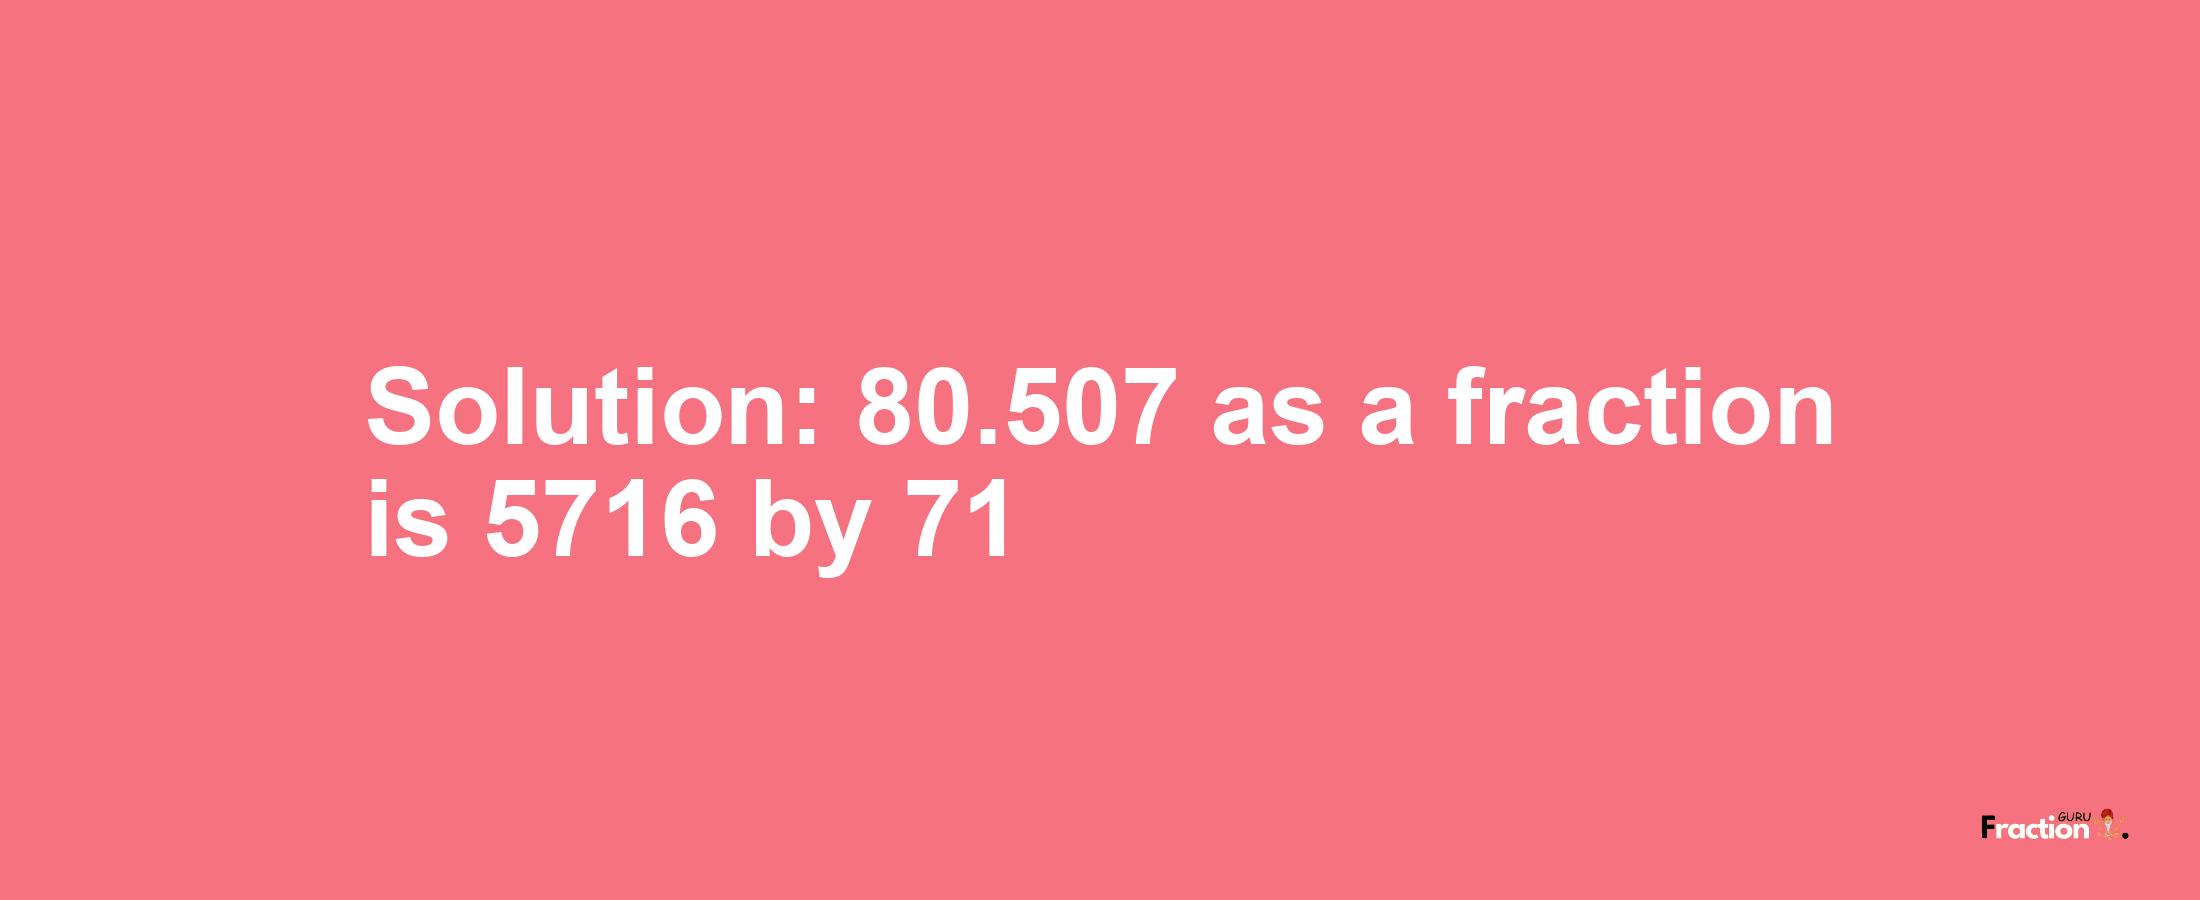 Solution:80.507 as a fraction is 5716/71